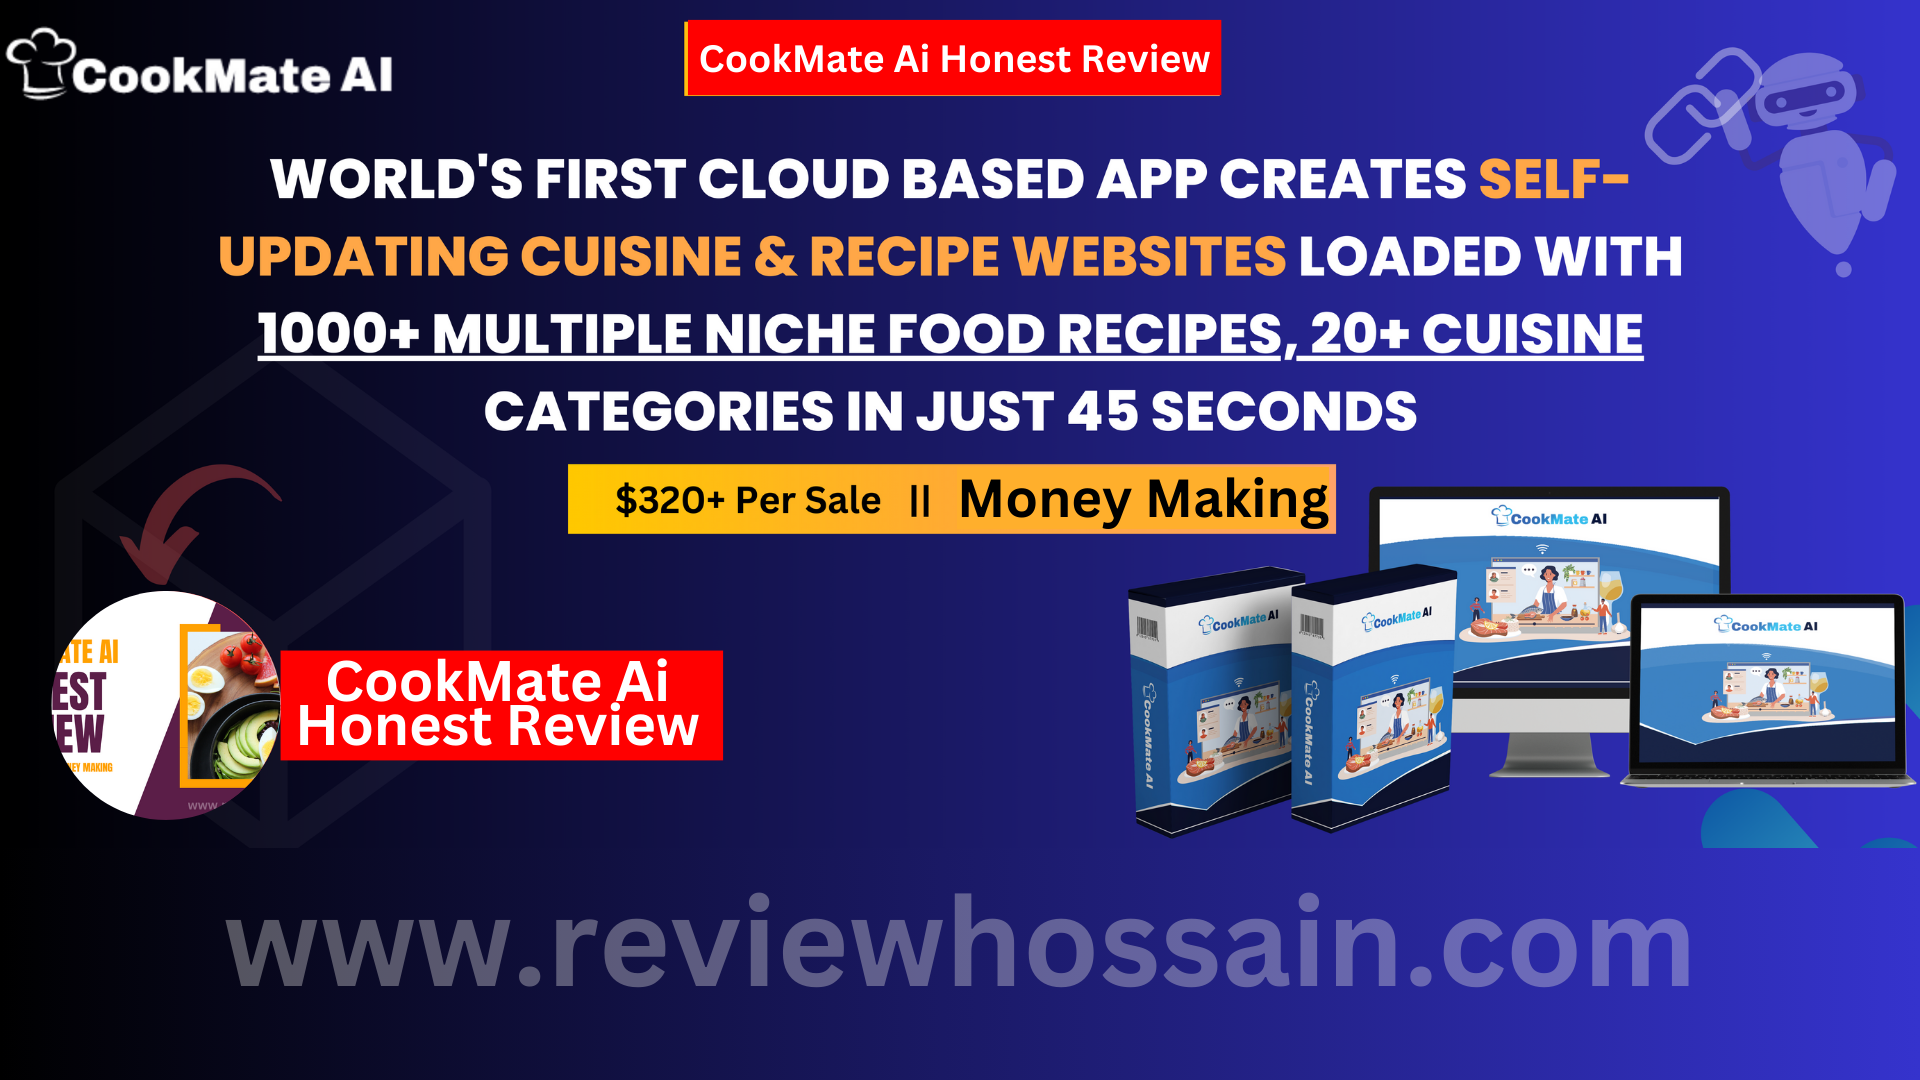 CookMate AI Honest Review  Make Money With Food and Recip - Arkansas - Little Rock  ID1535043 2